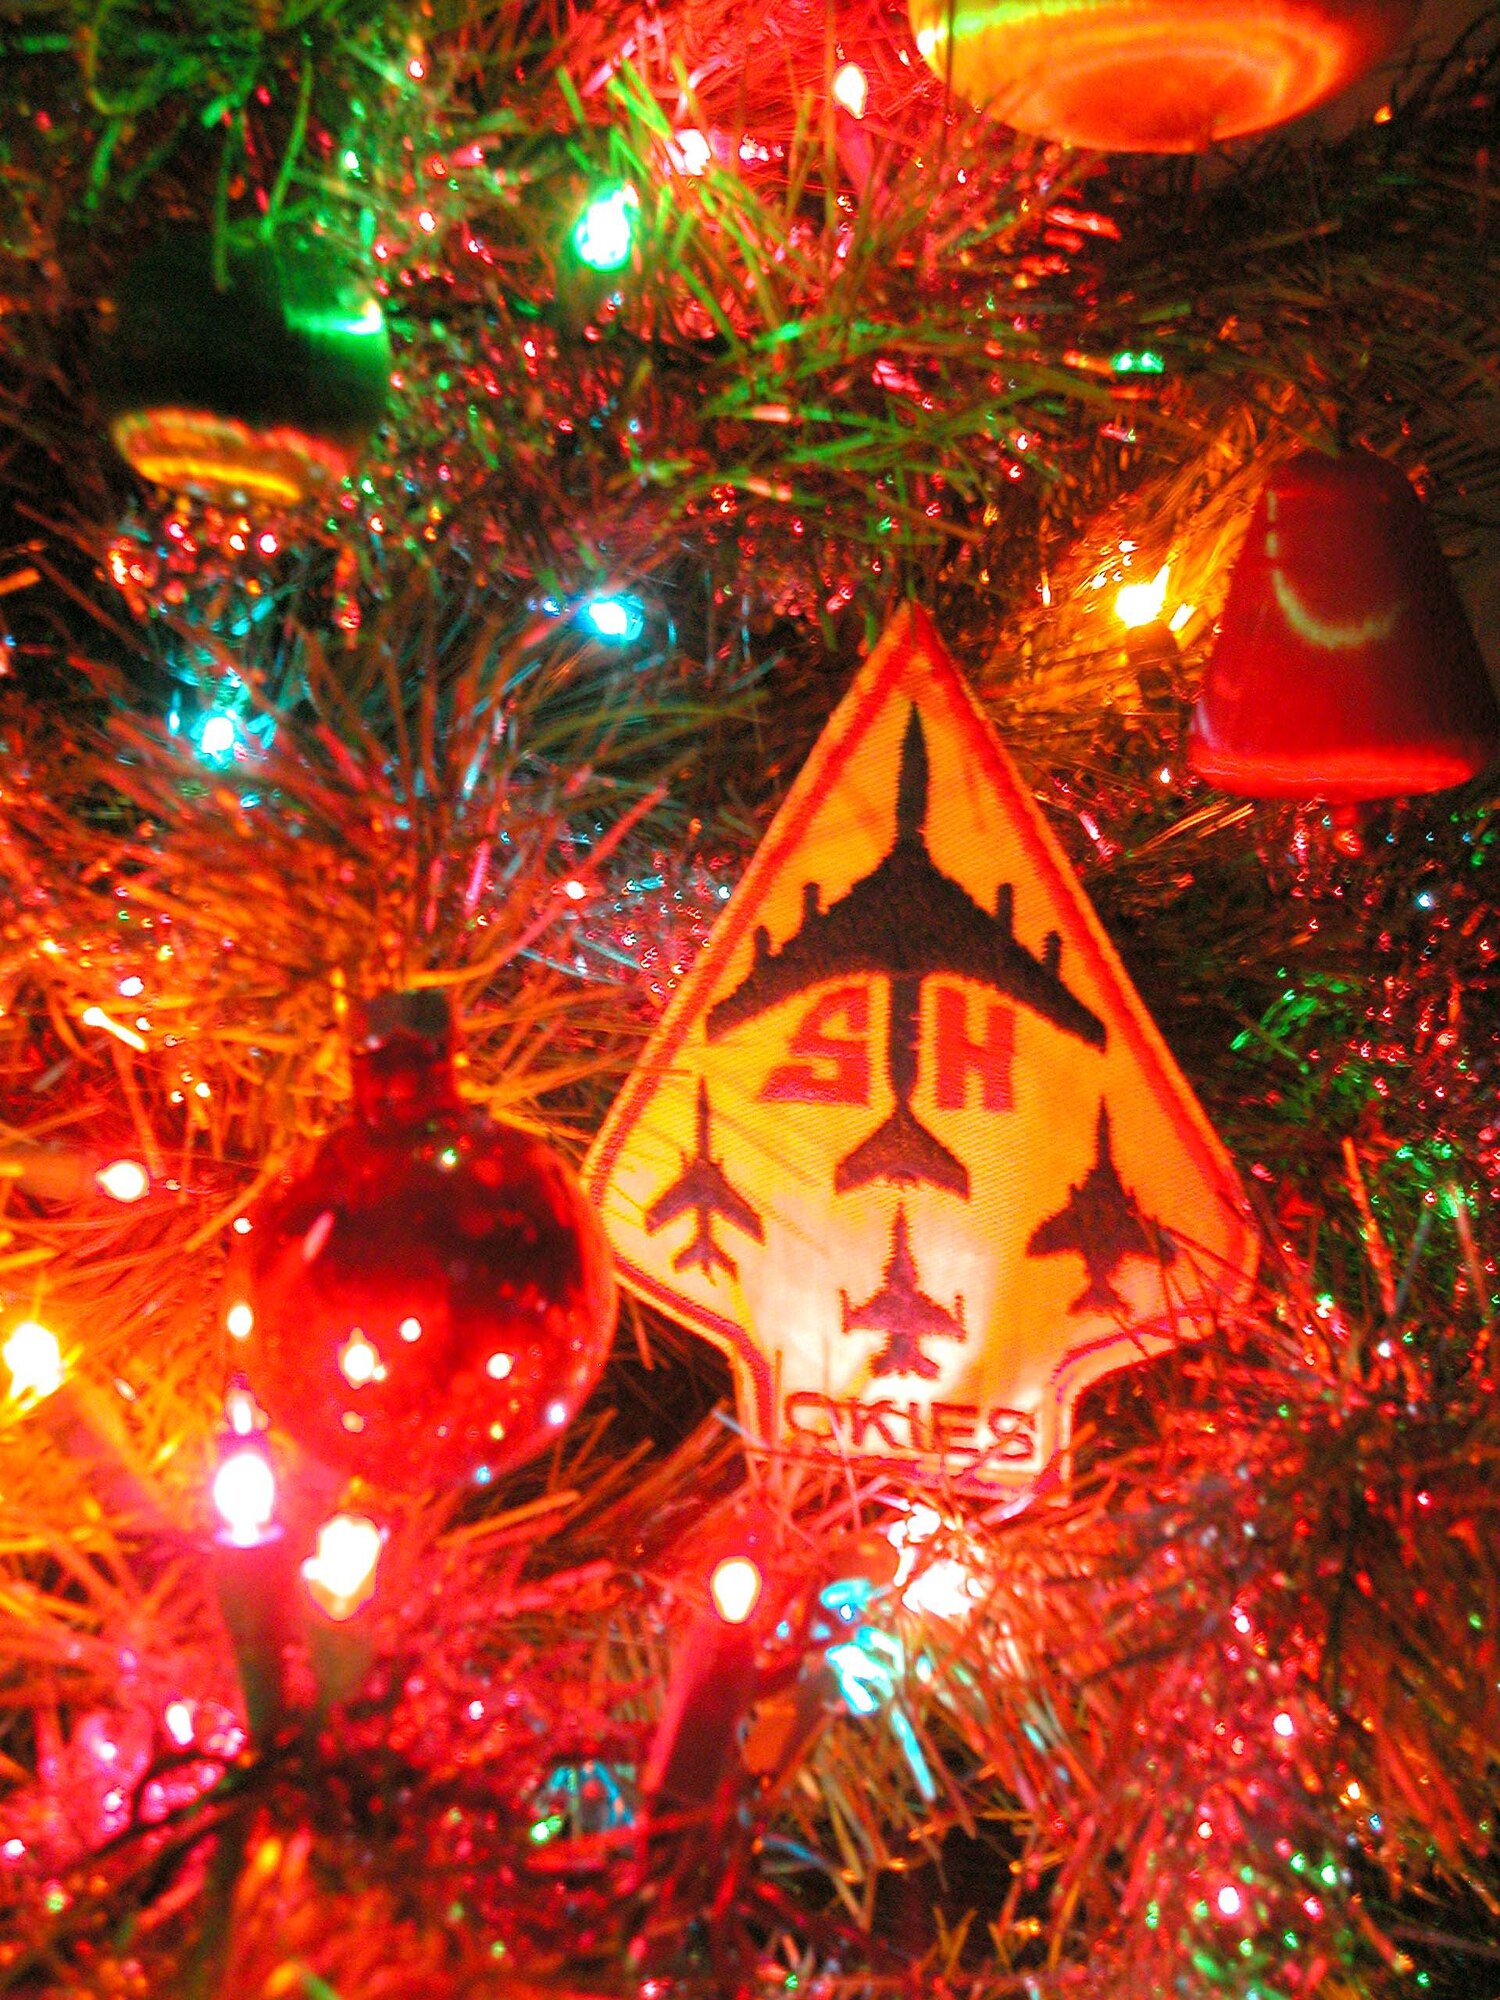 The 507th Air Refueling Wing "Okie" patch is perched among the ornaments adorning this Christmas tree as wing Airmen pass on their Christmas greetings to all. 